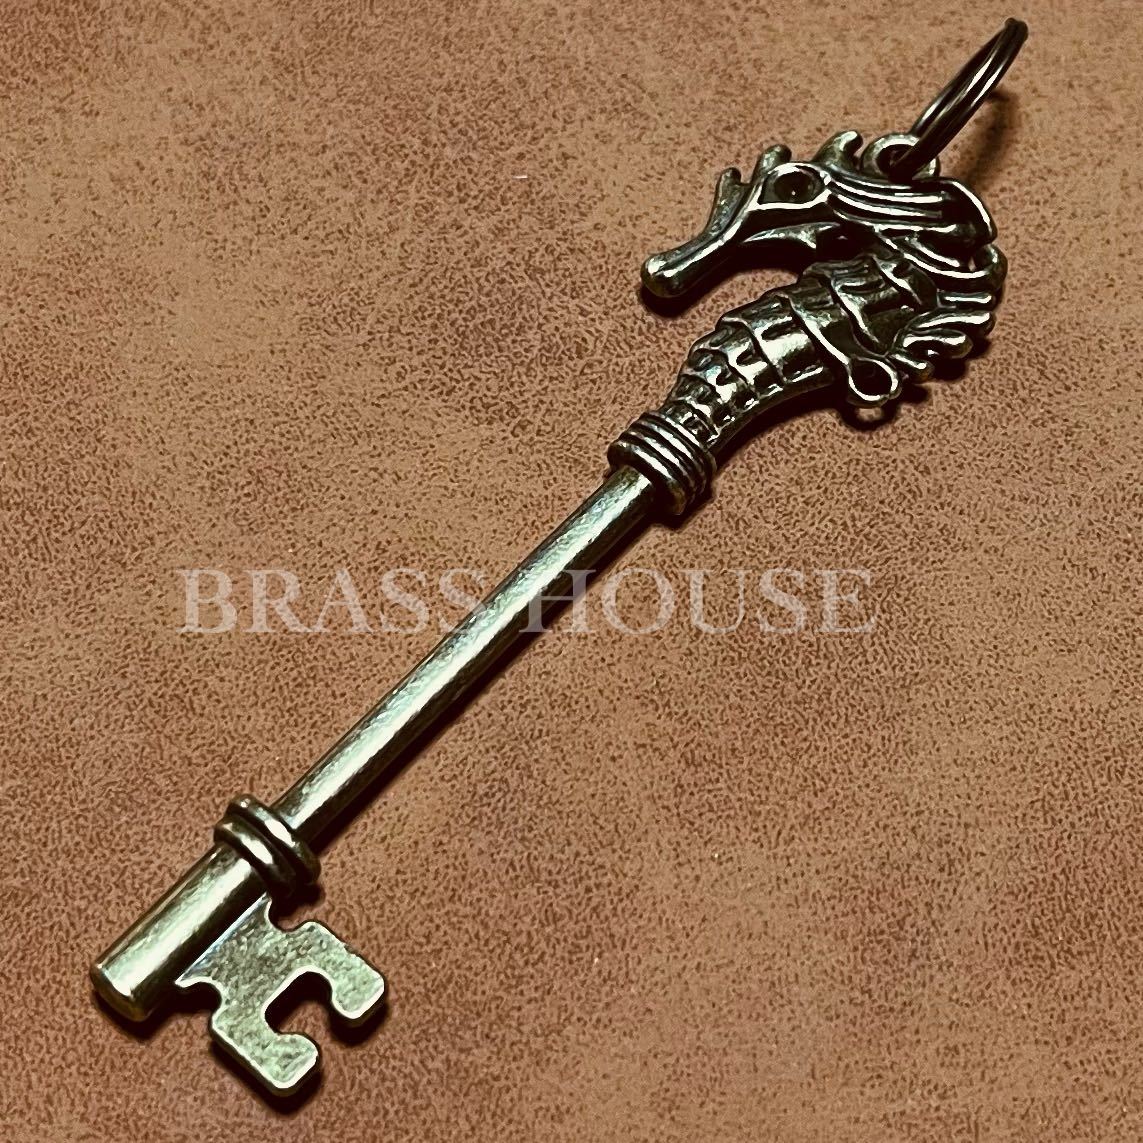 G2si- hose seahorse antique key key key holder better fortune .. thing Vintage key ring real accessory Gold 